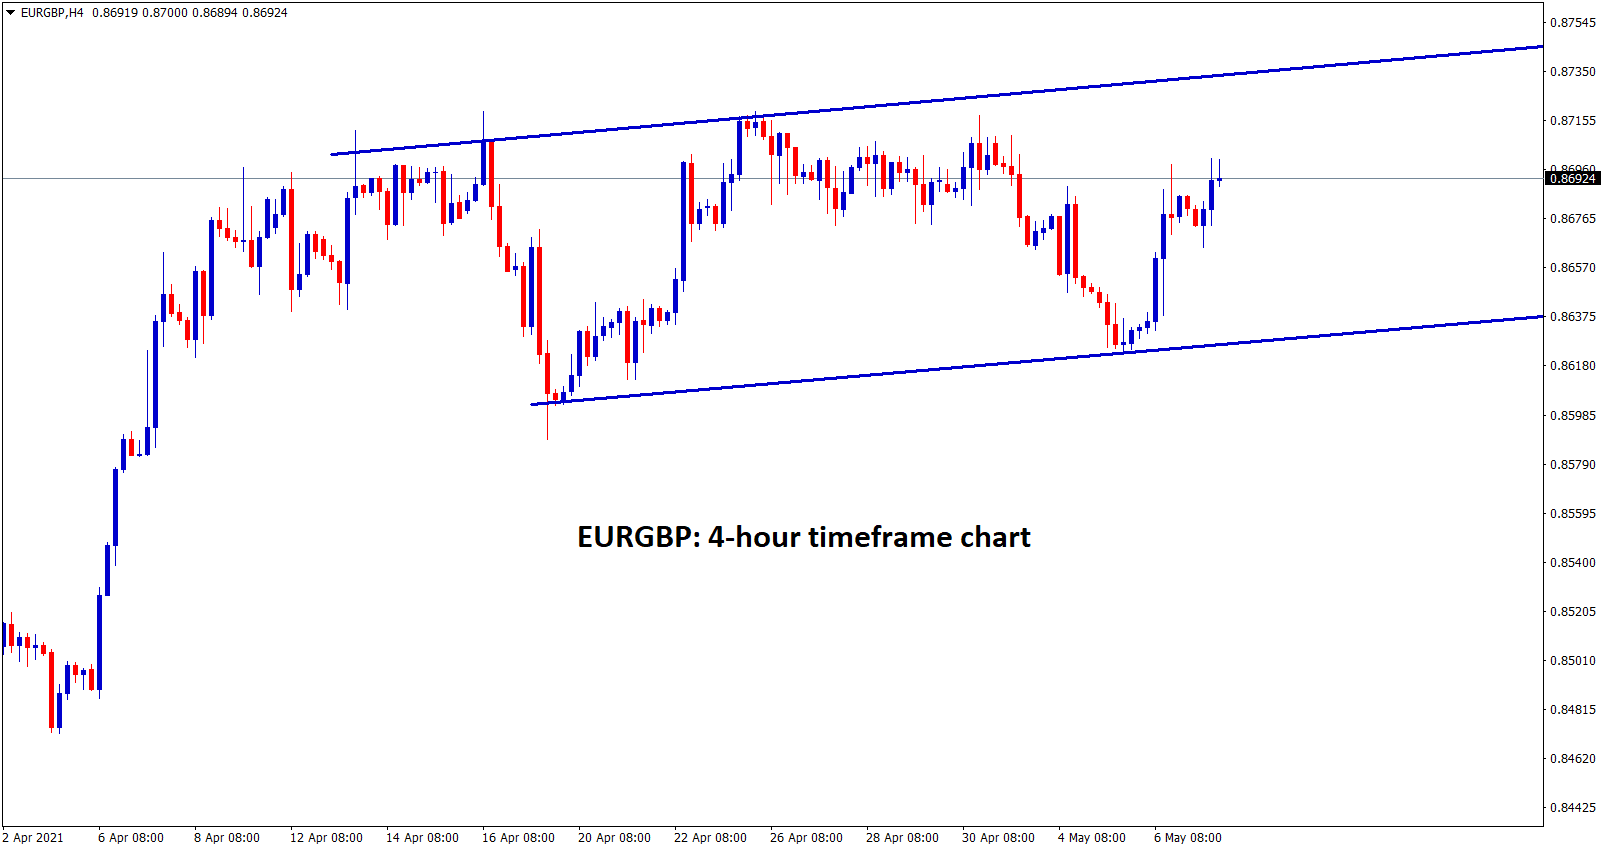 EURGBP is making a ranging movement